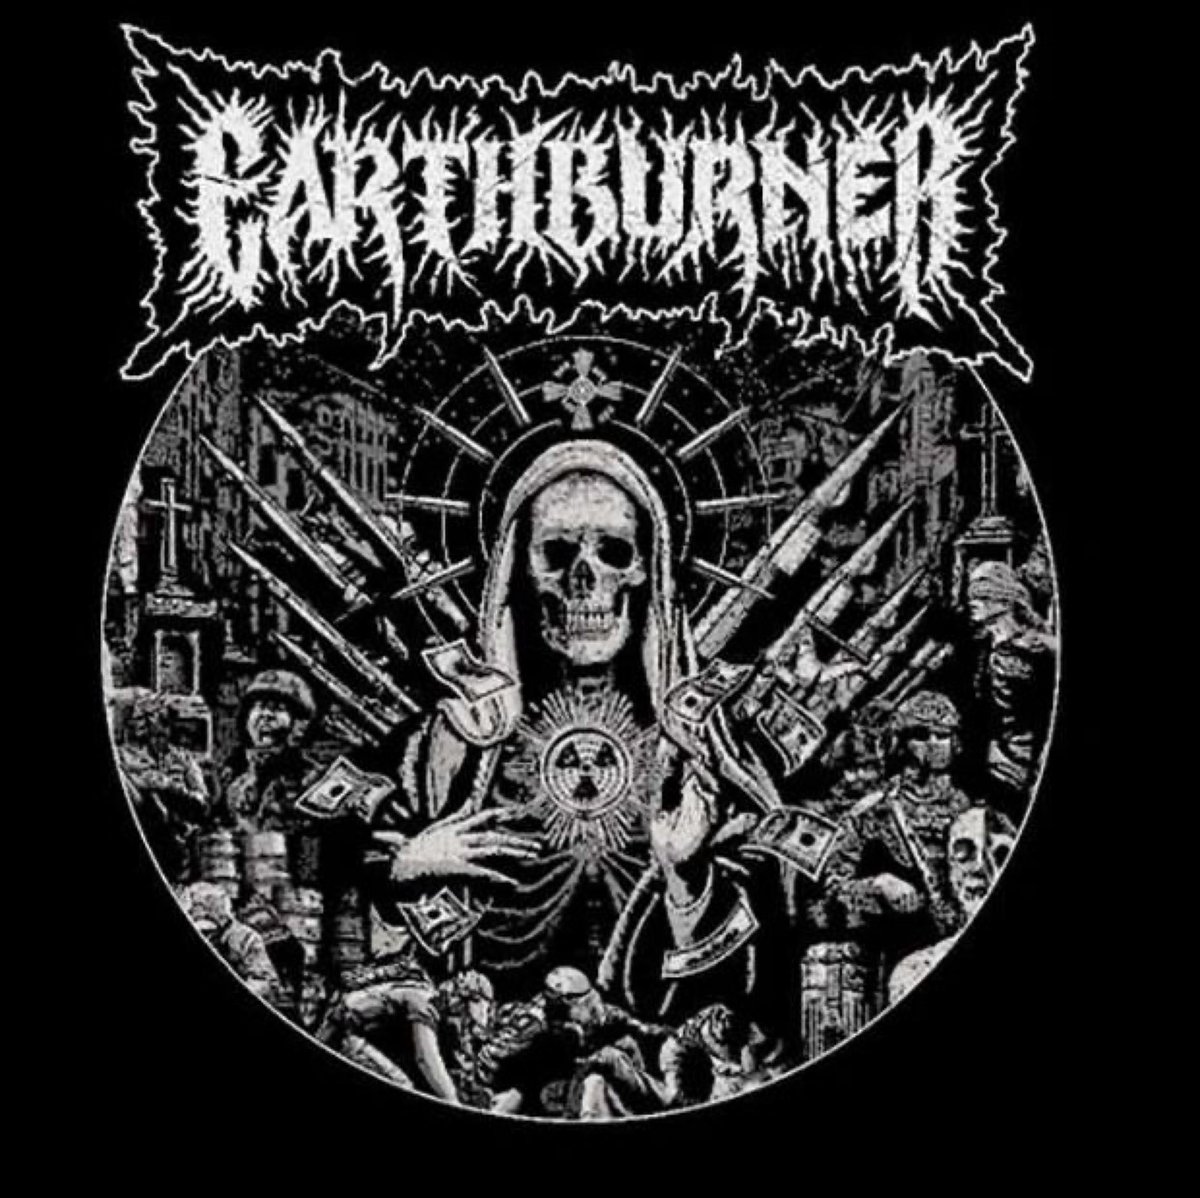 Extreme Metal Fans get ready
The relentless savagery that is EarthBurner has arrived. It’s taken 21 years, but the sickness spawned from the mind of BrokenHope’s Jeremy Wagner has finally come to fruition

Joining Wagner in his twisted vision are BH co-conspirator Mike Miczer…